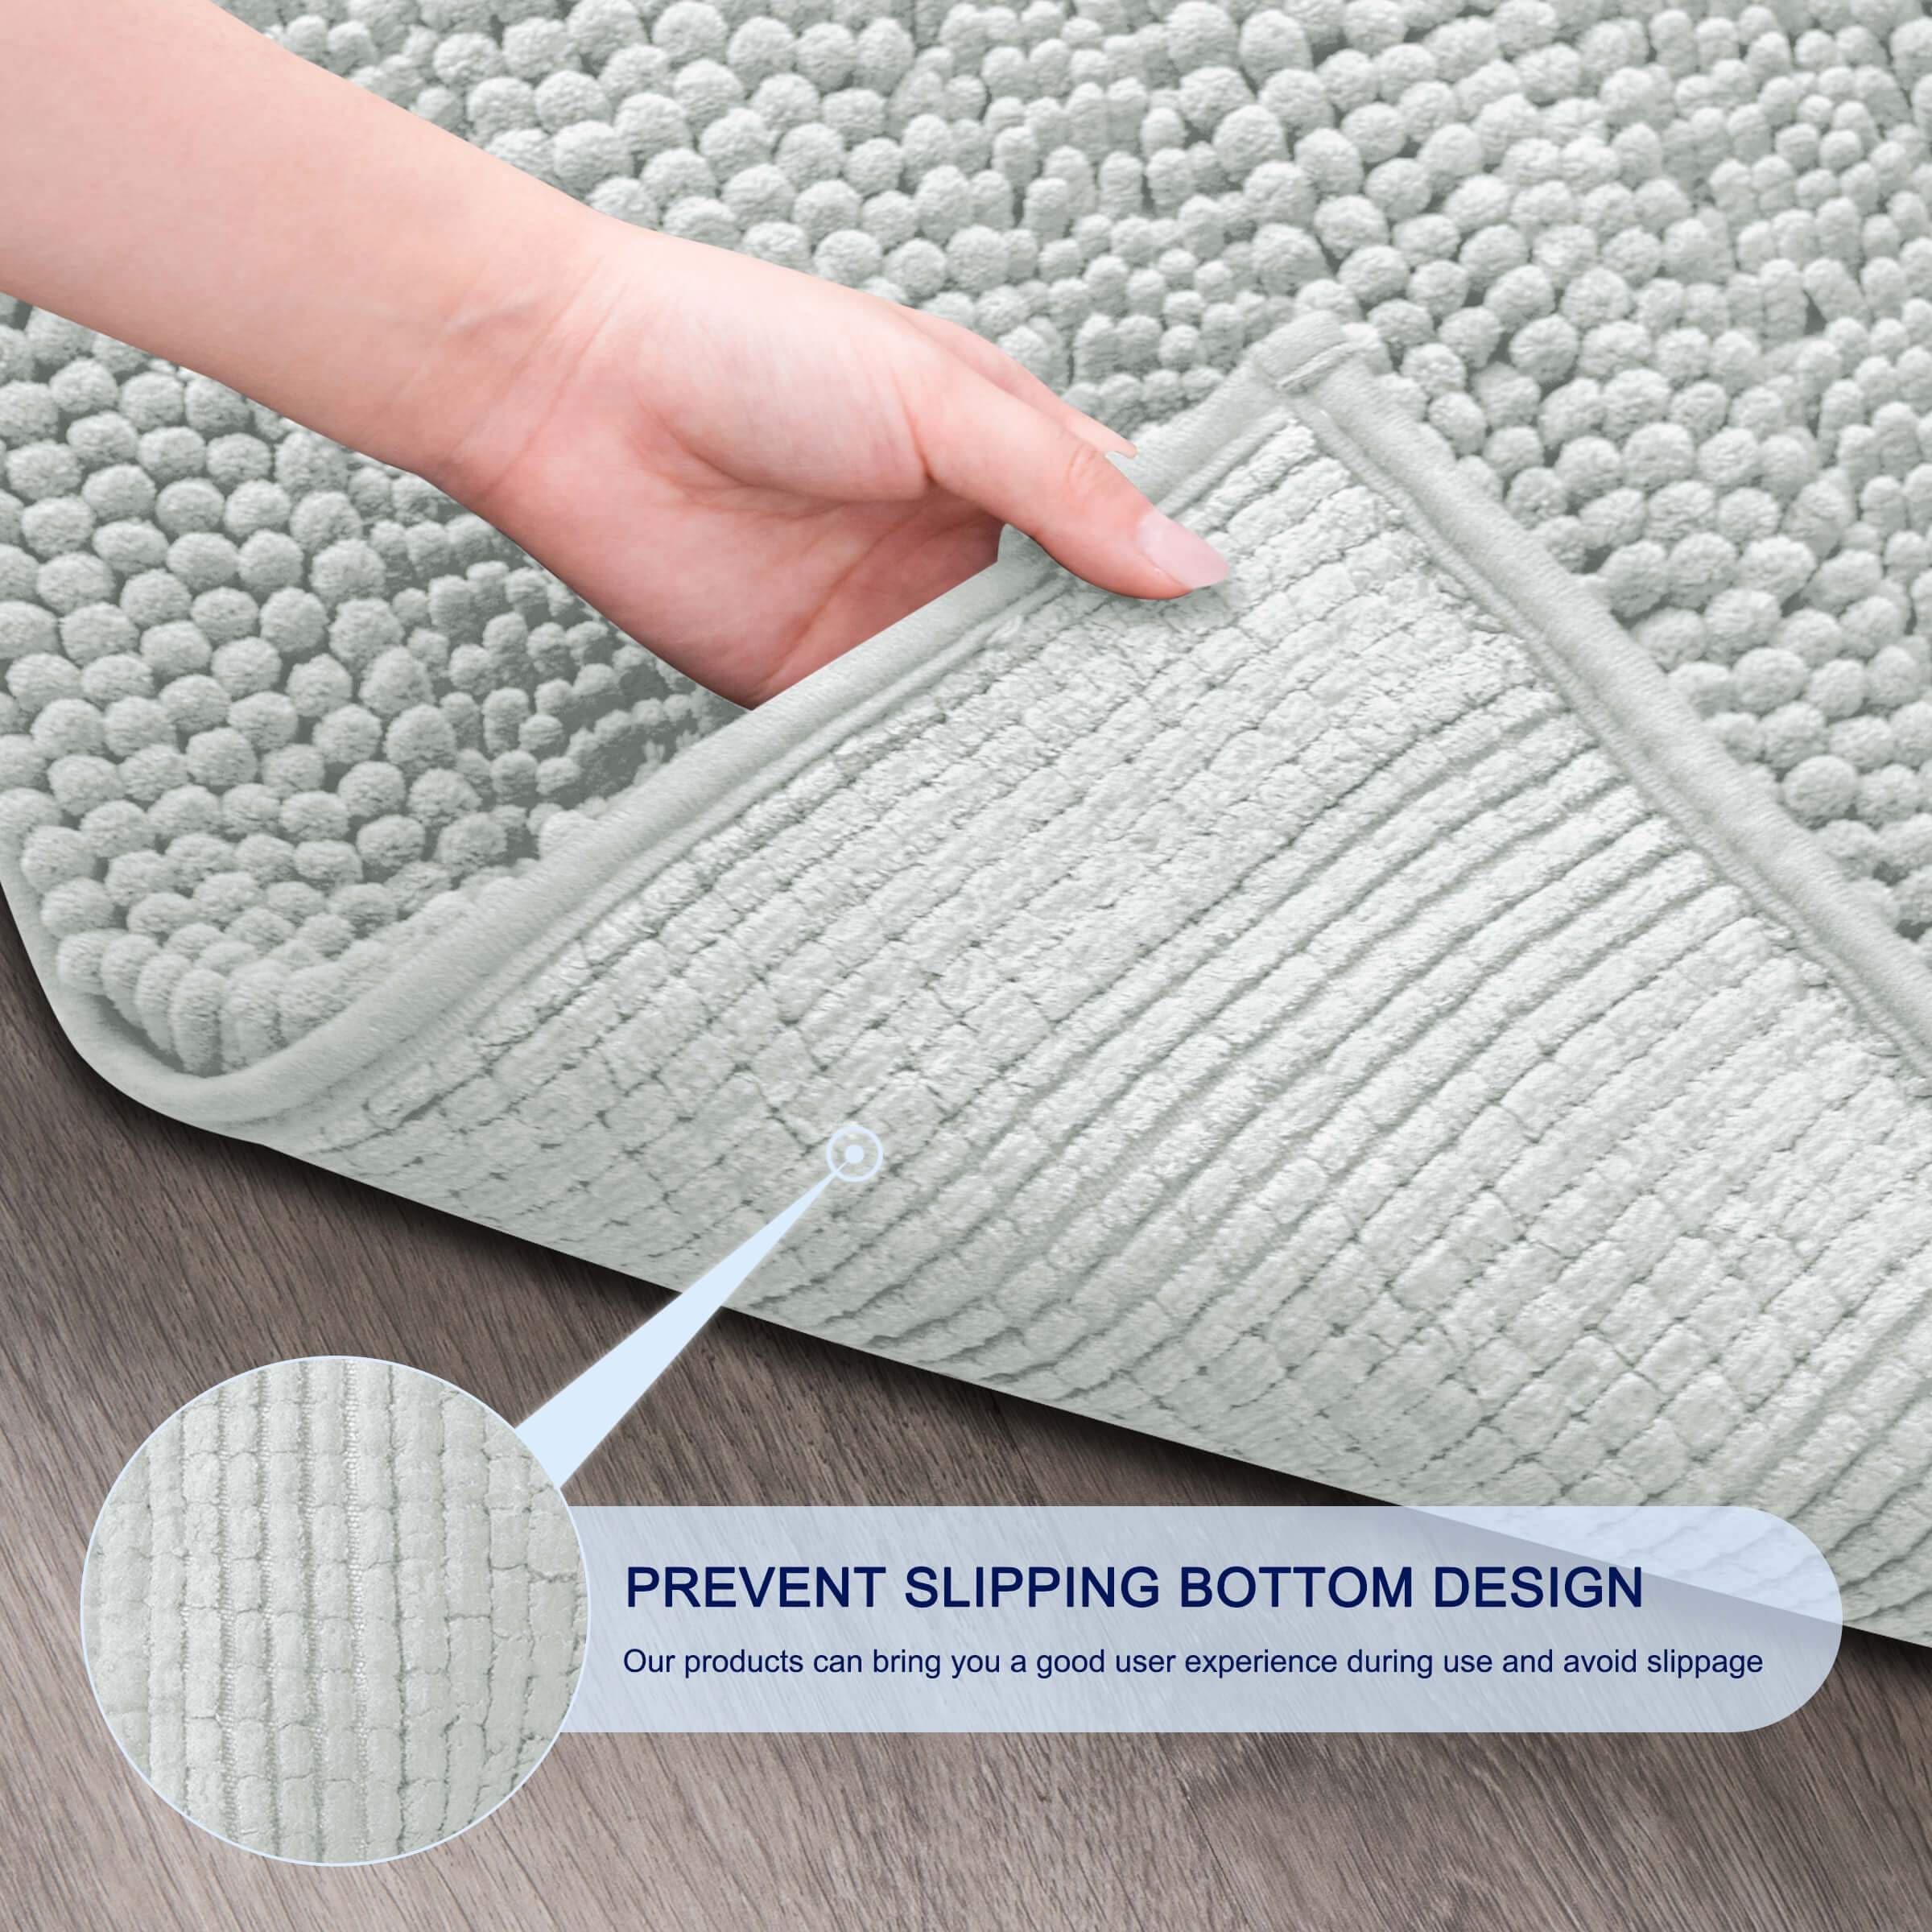 https://ak1.ostkcdn.com/images/products/is/images/direct/9705d1f0f1432a831bc2c2ca6db9f65472017487/Subrtex-Supersoft-and-Absorbent-Braided-Bathroom-Rugs-Chenille-Bath-Rugs.jpg